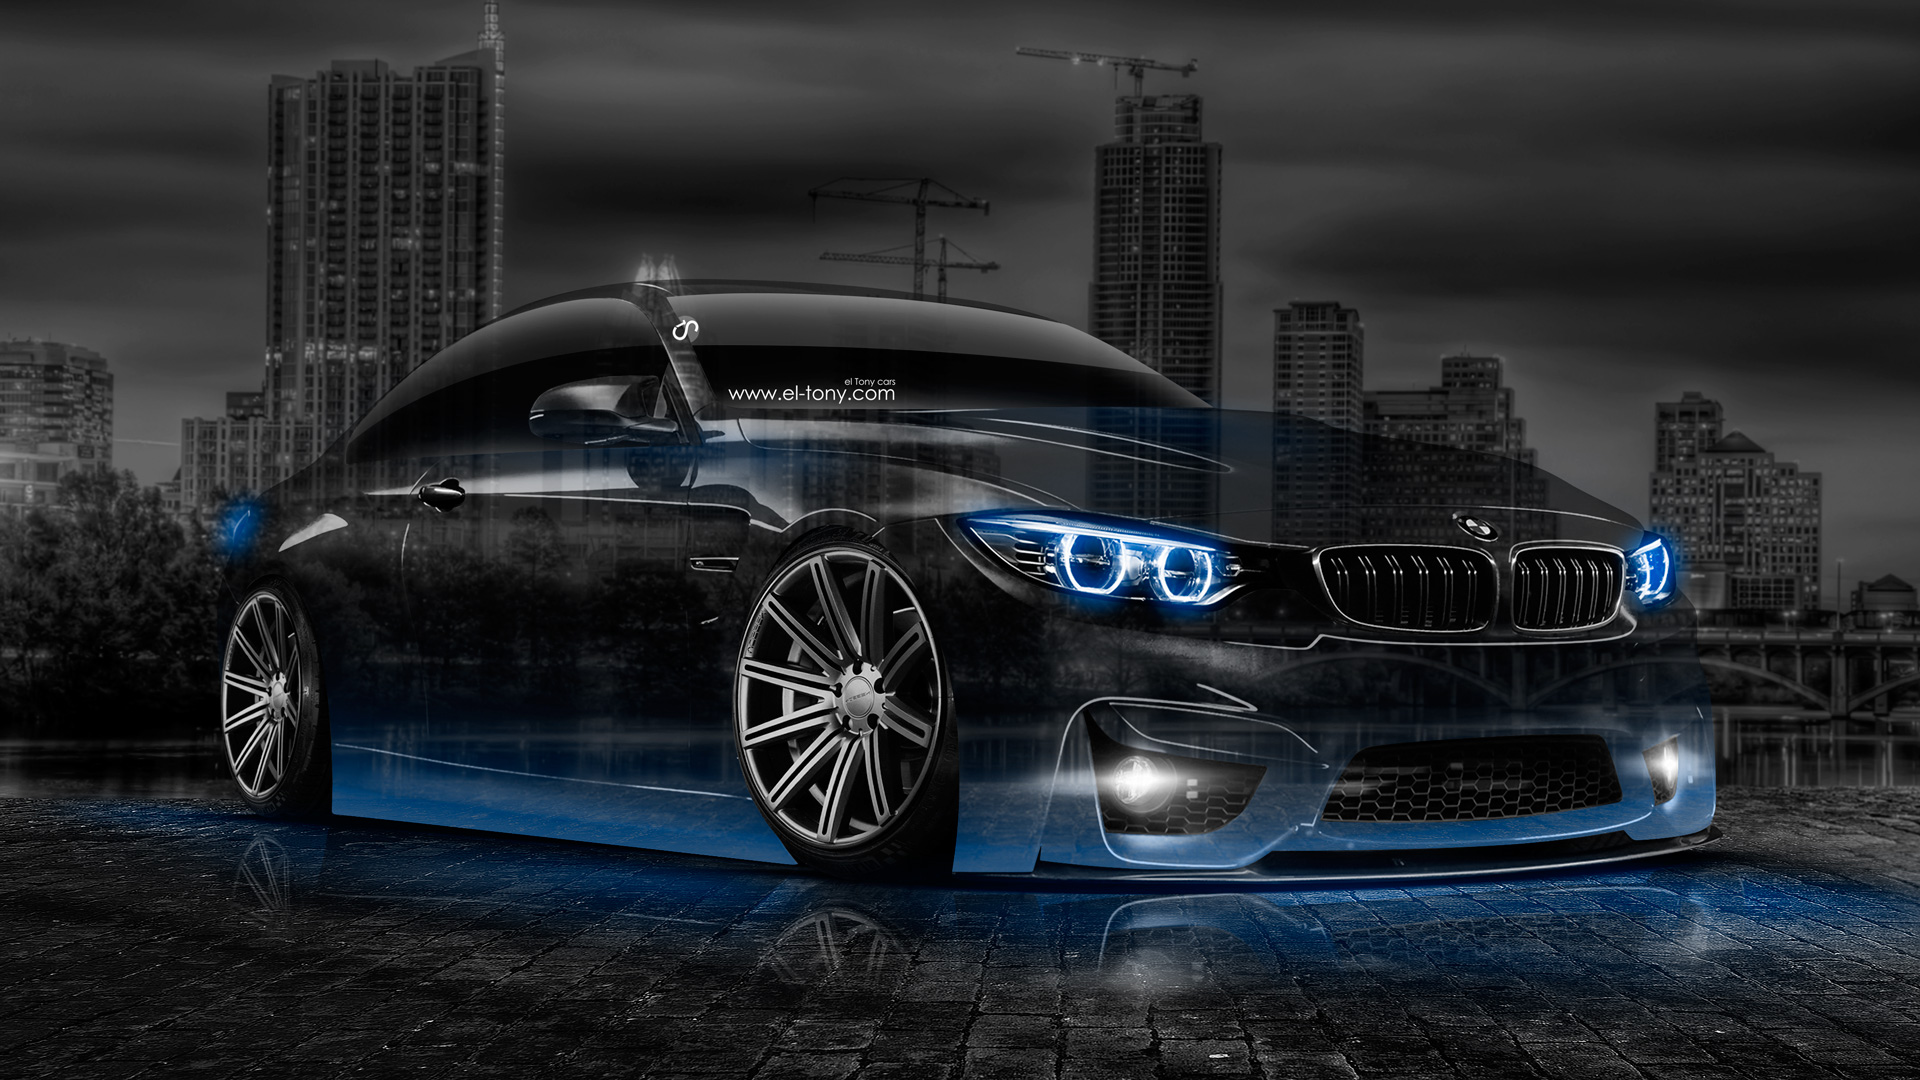 Free Download Bmw M4 Crystal City Car 2014 Blue Neon Hd Wallpapers Design By Tony 1920x1080 For Your Desktop Mobile Tablet Explore 72 M4 Wallpaper Bmw M4 Wallpaper M4